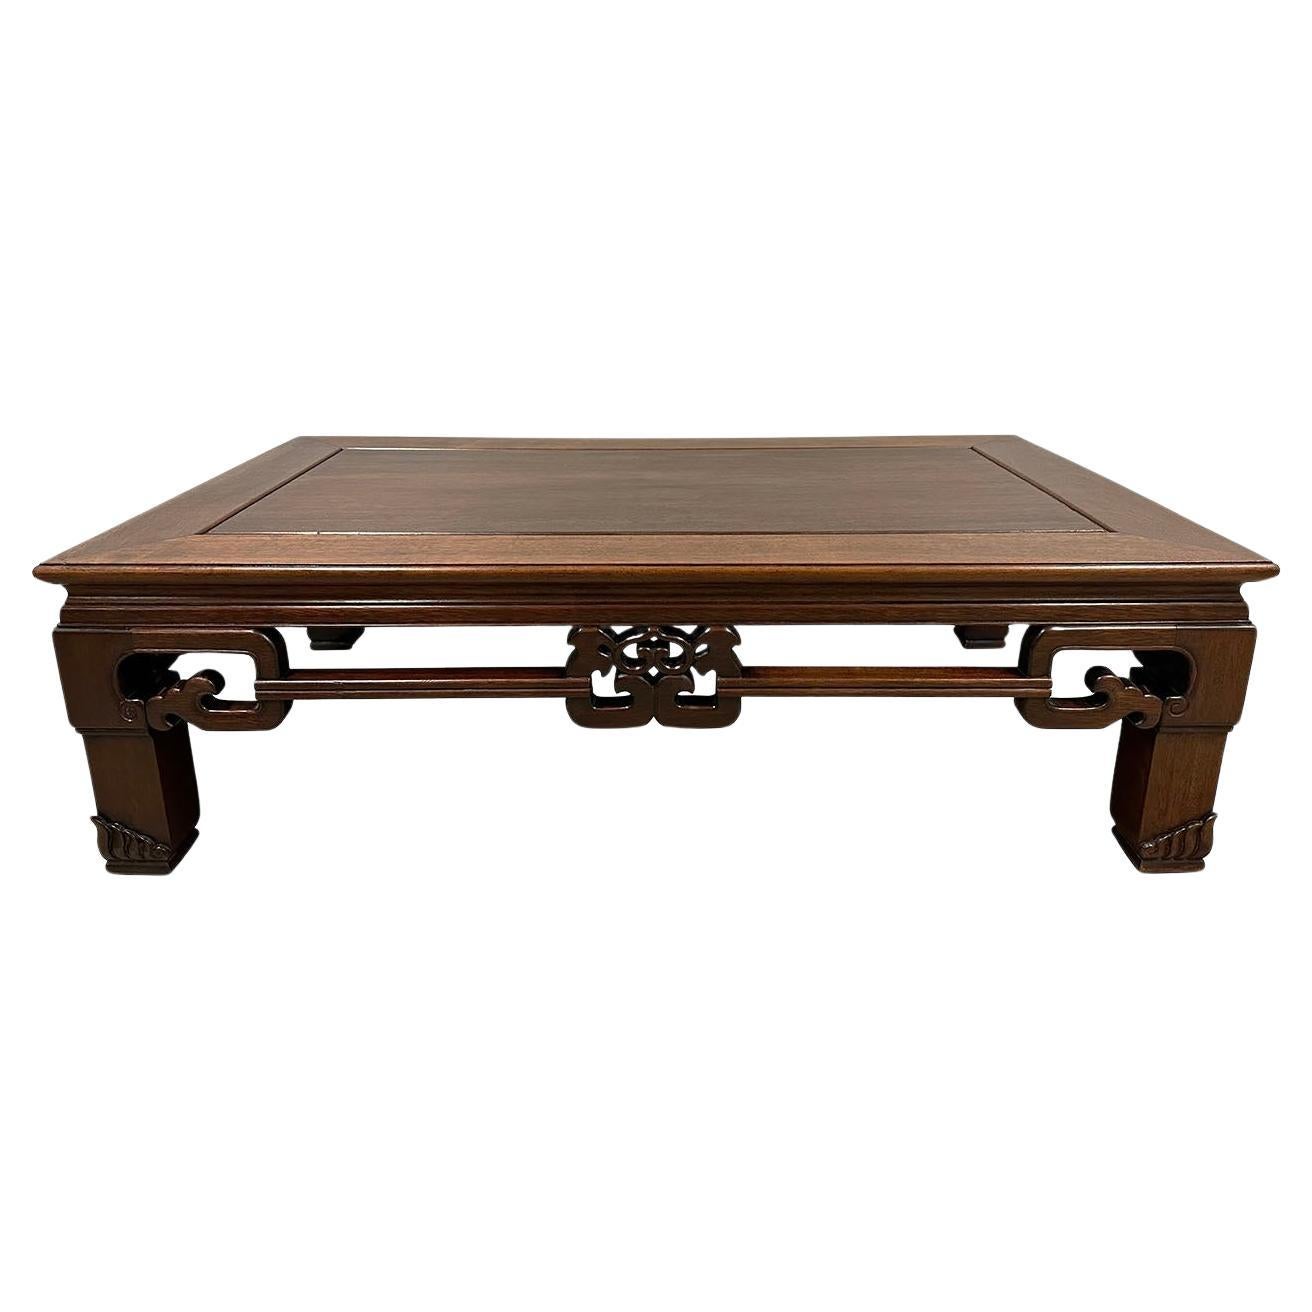 Mid-20th Century Chinese Rosewood Carved Coffee Table